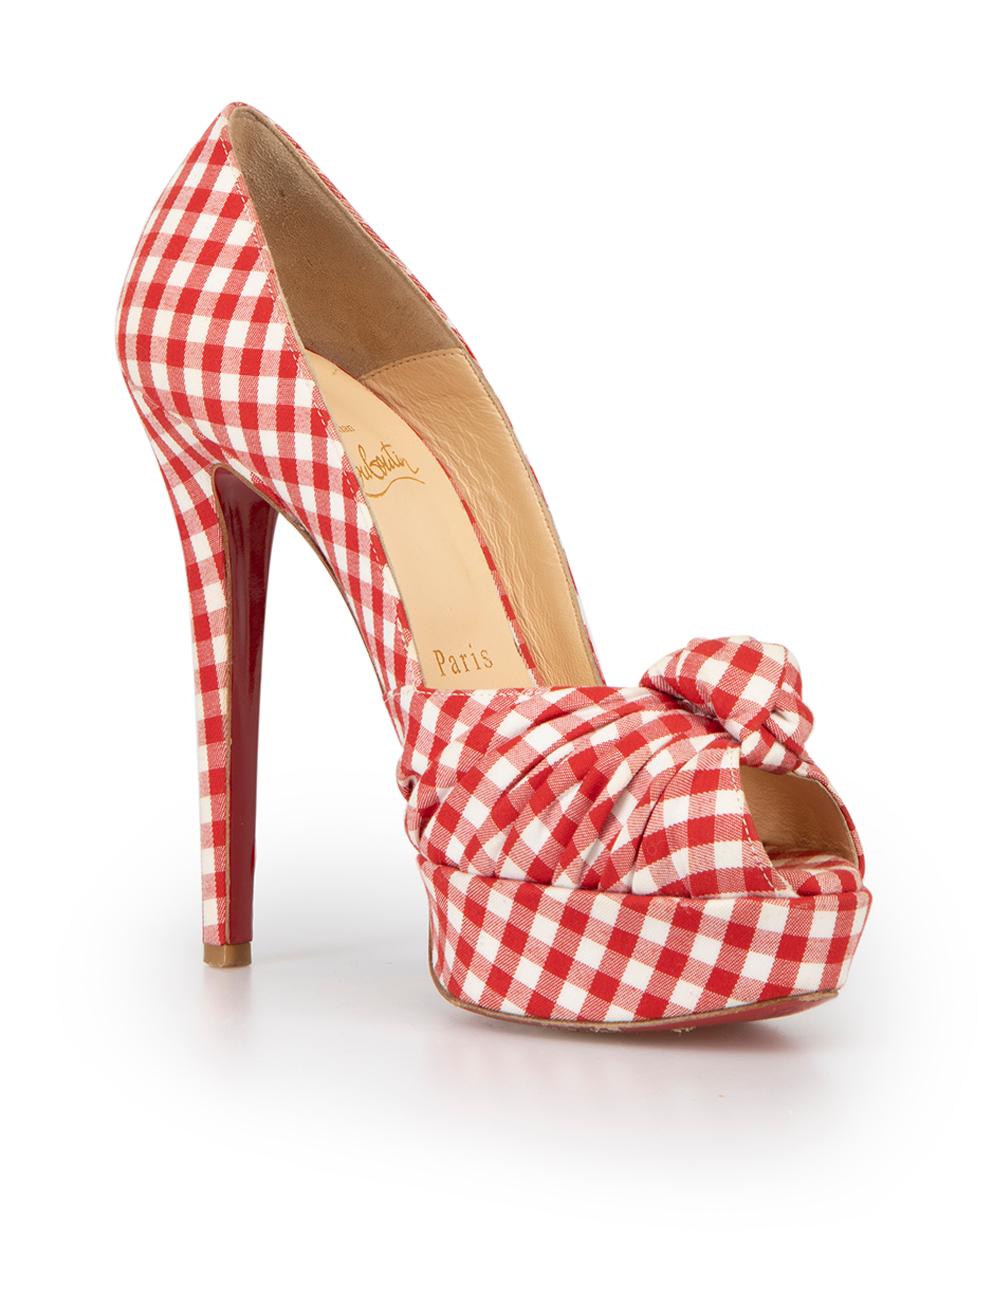 CONDITION is Very good. Hardly any visible wear to shoes is evident on this used Christian Louboutin designer resale item.



Details


Red and white

Cloth textile

Gingham pattern heels

Peep toe

Platform high heel

Knot accent





Made in